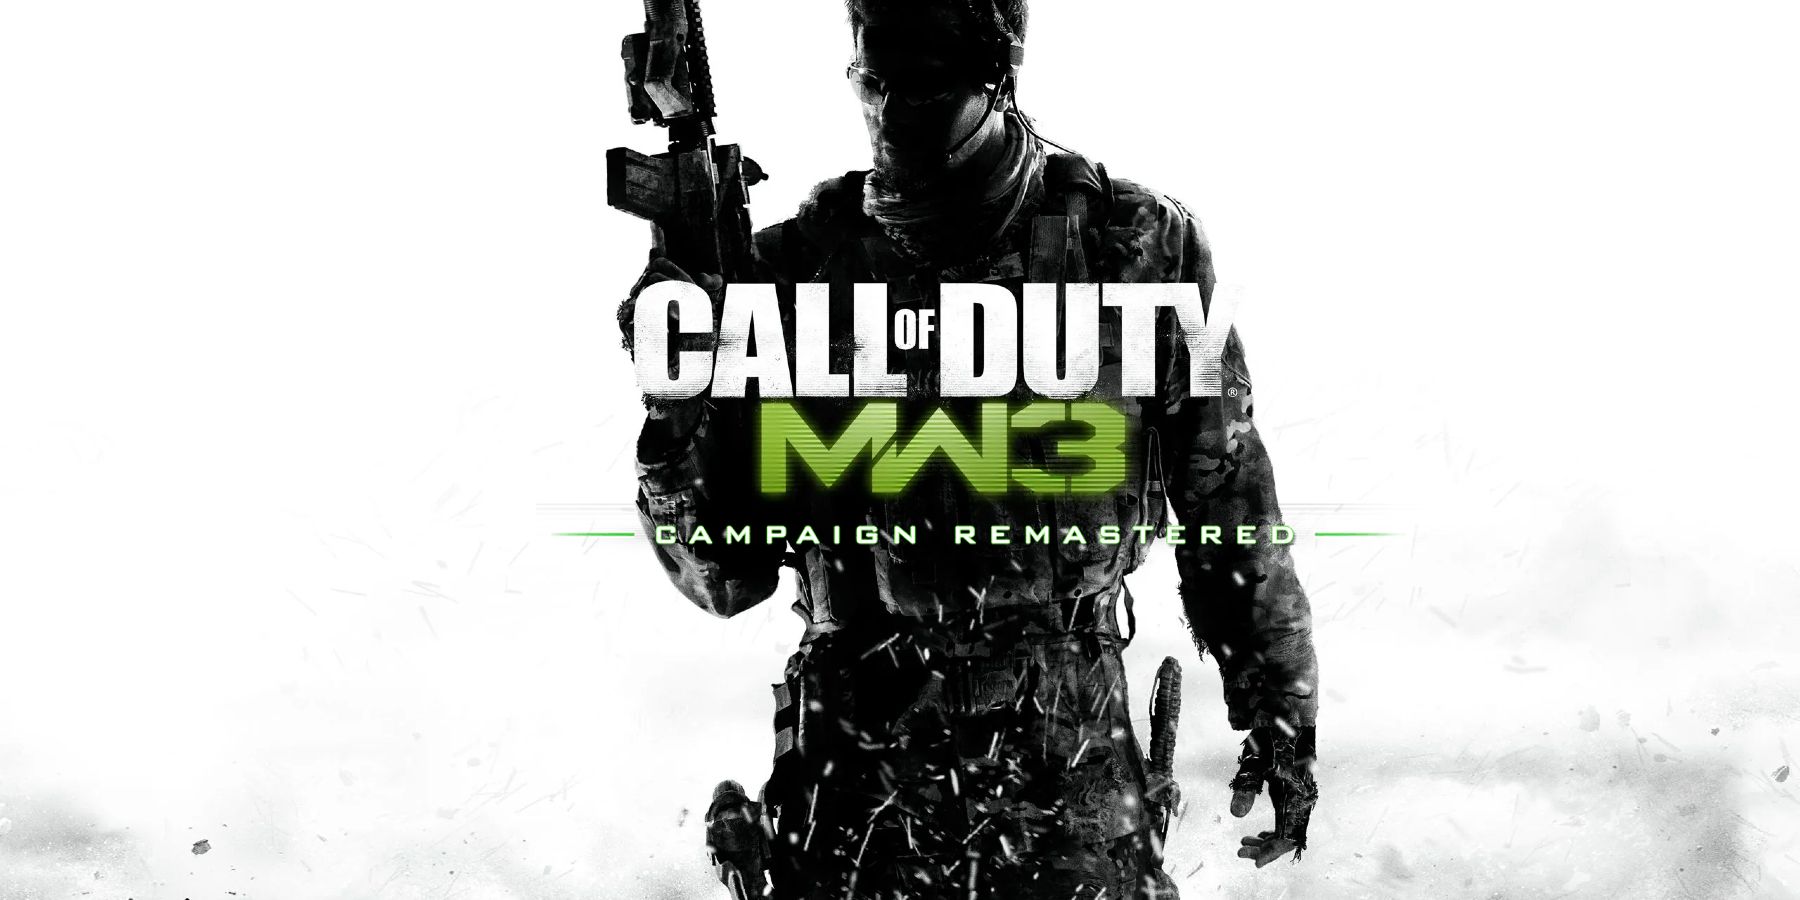 Mw3 Campaign Remastered 